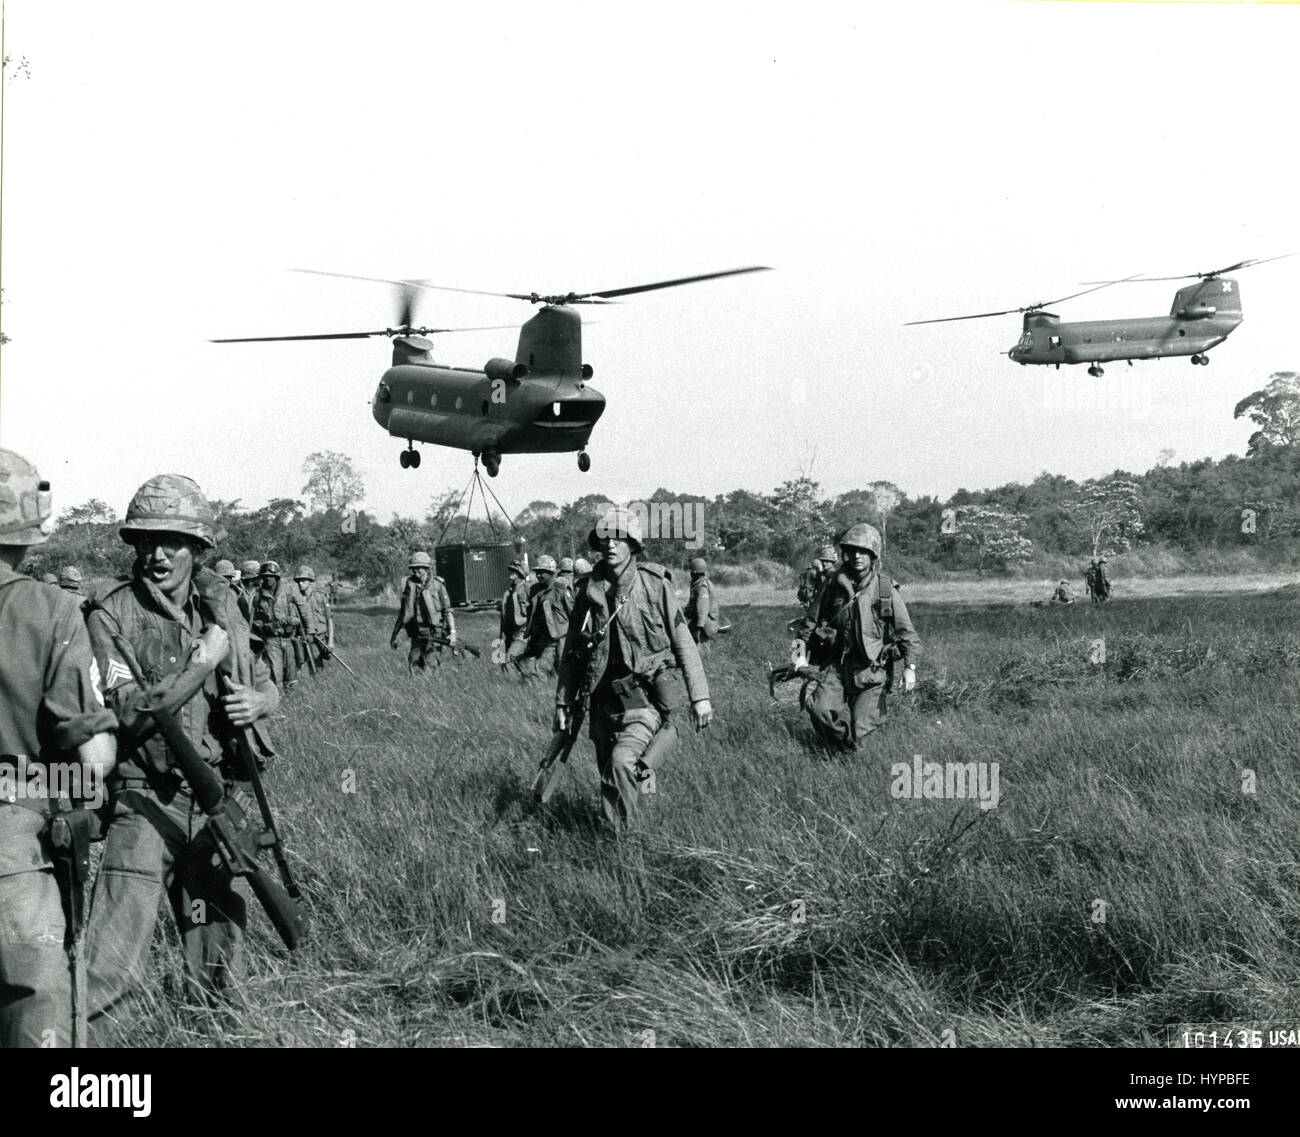 US Army troops on the move in South Vietnam during OPERATION JUNCTION CITY. Hovering in the background are Army CH-47 Chinook helicopters, 1967. Stock Photo